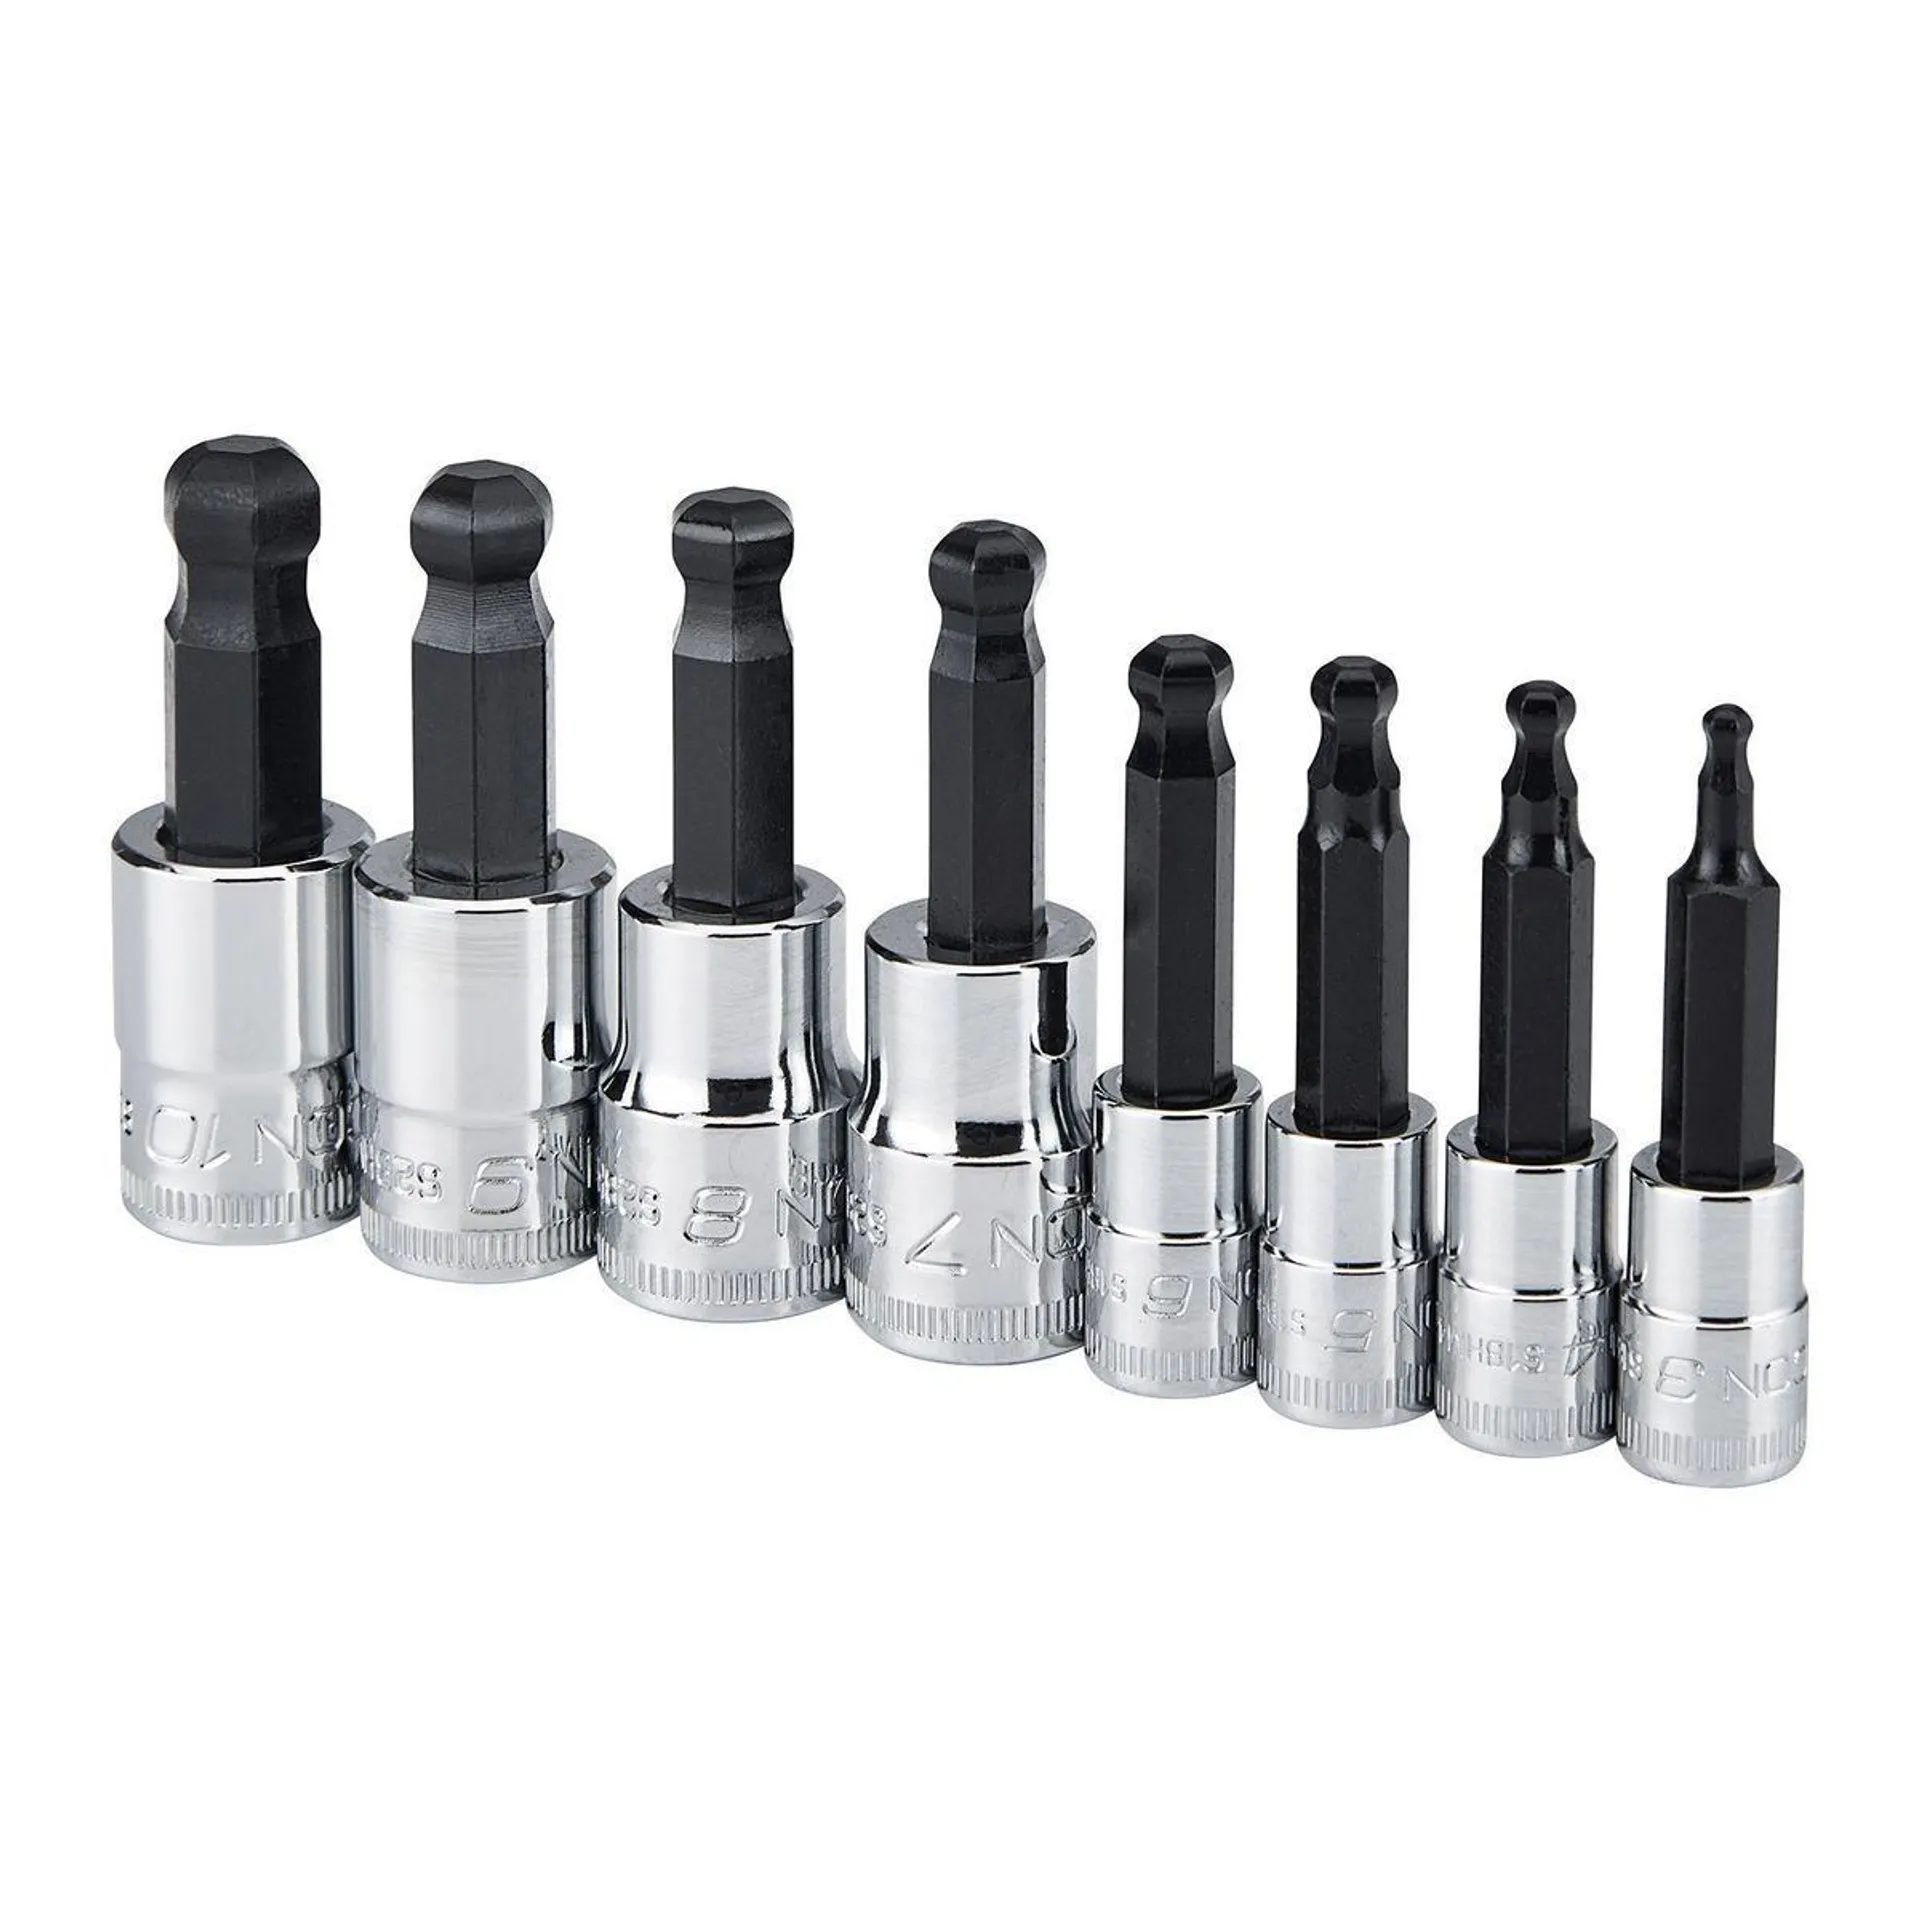 ICON 1/4 in. and 3/8 in. Drive Metric Professional Ball Hex Socket Set, 8 Piece